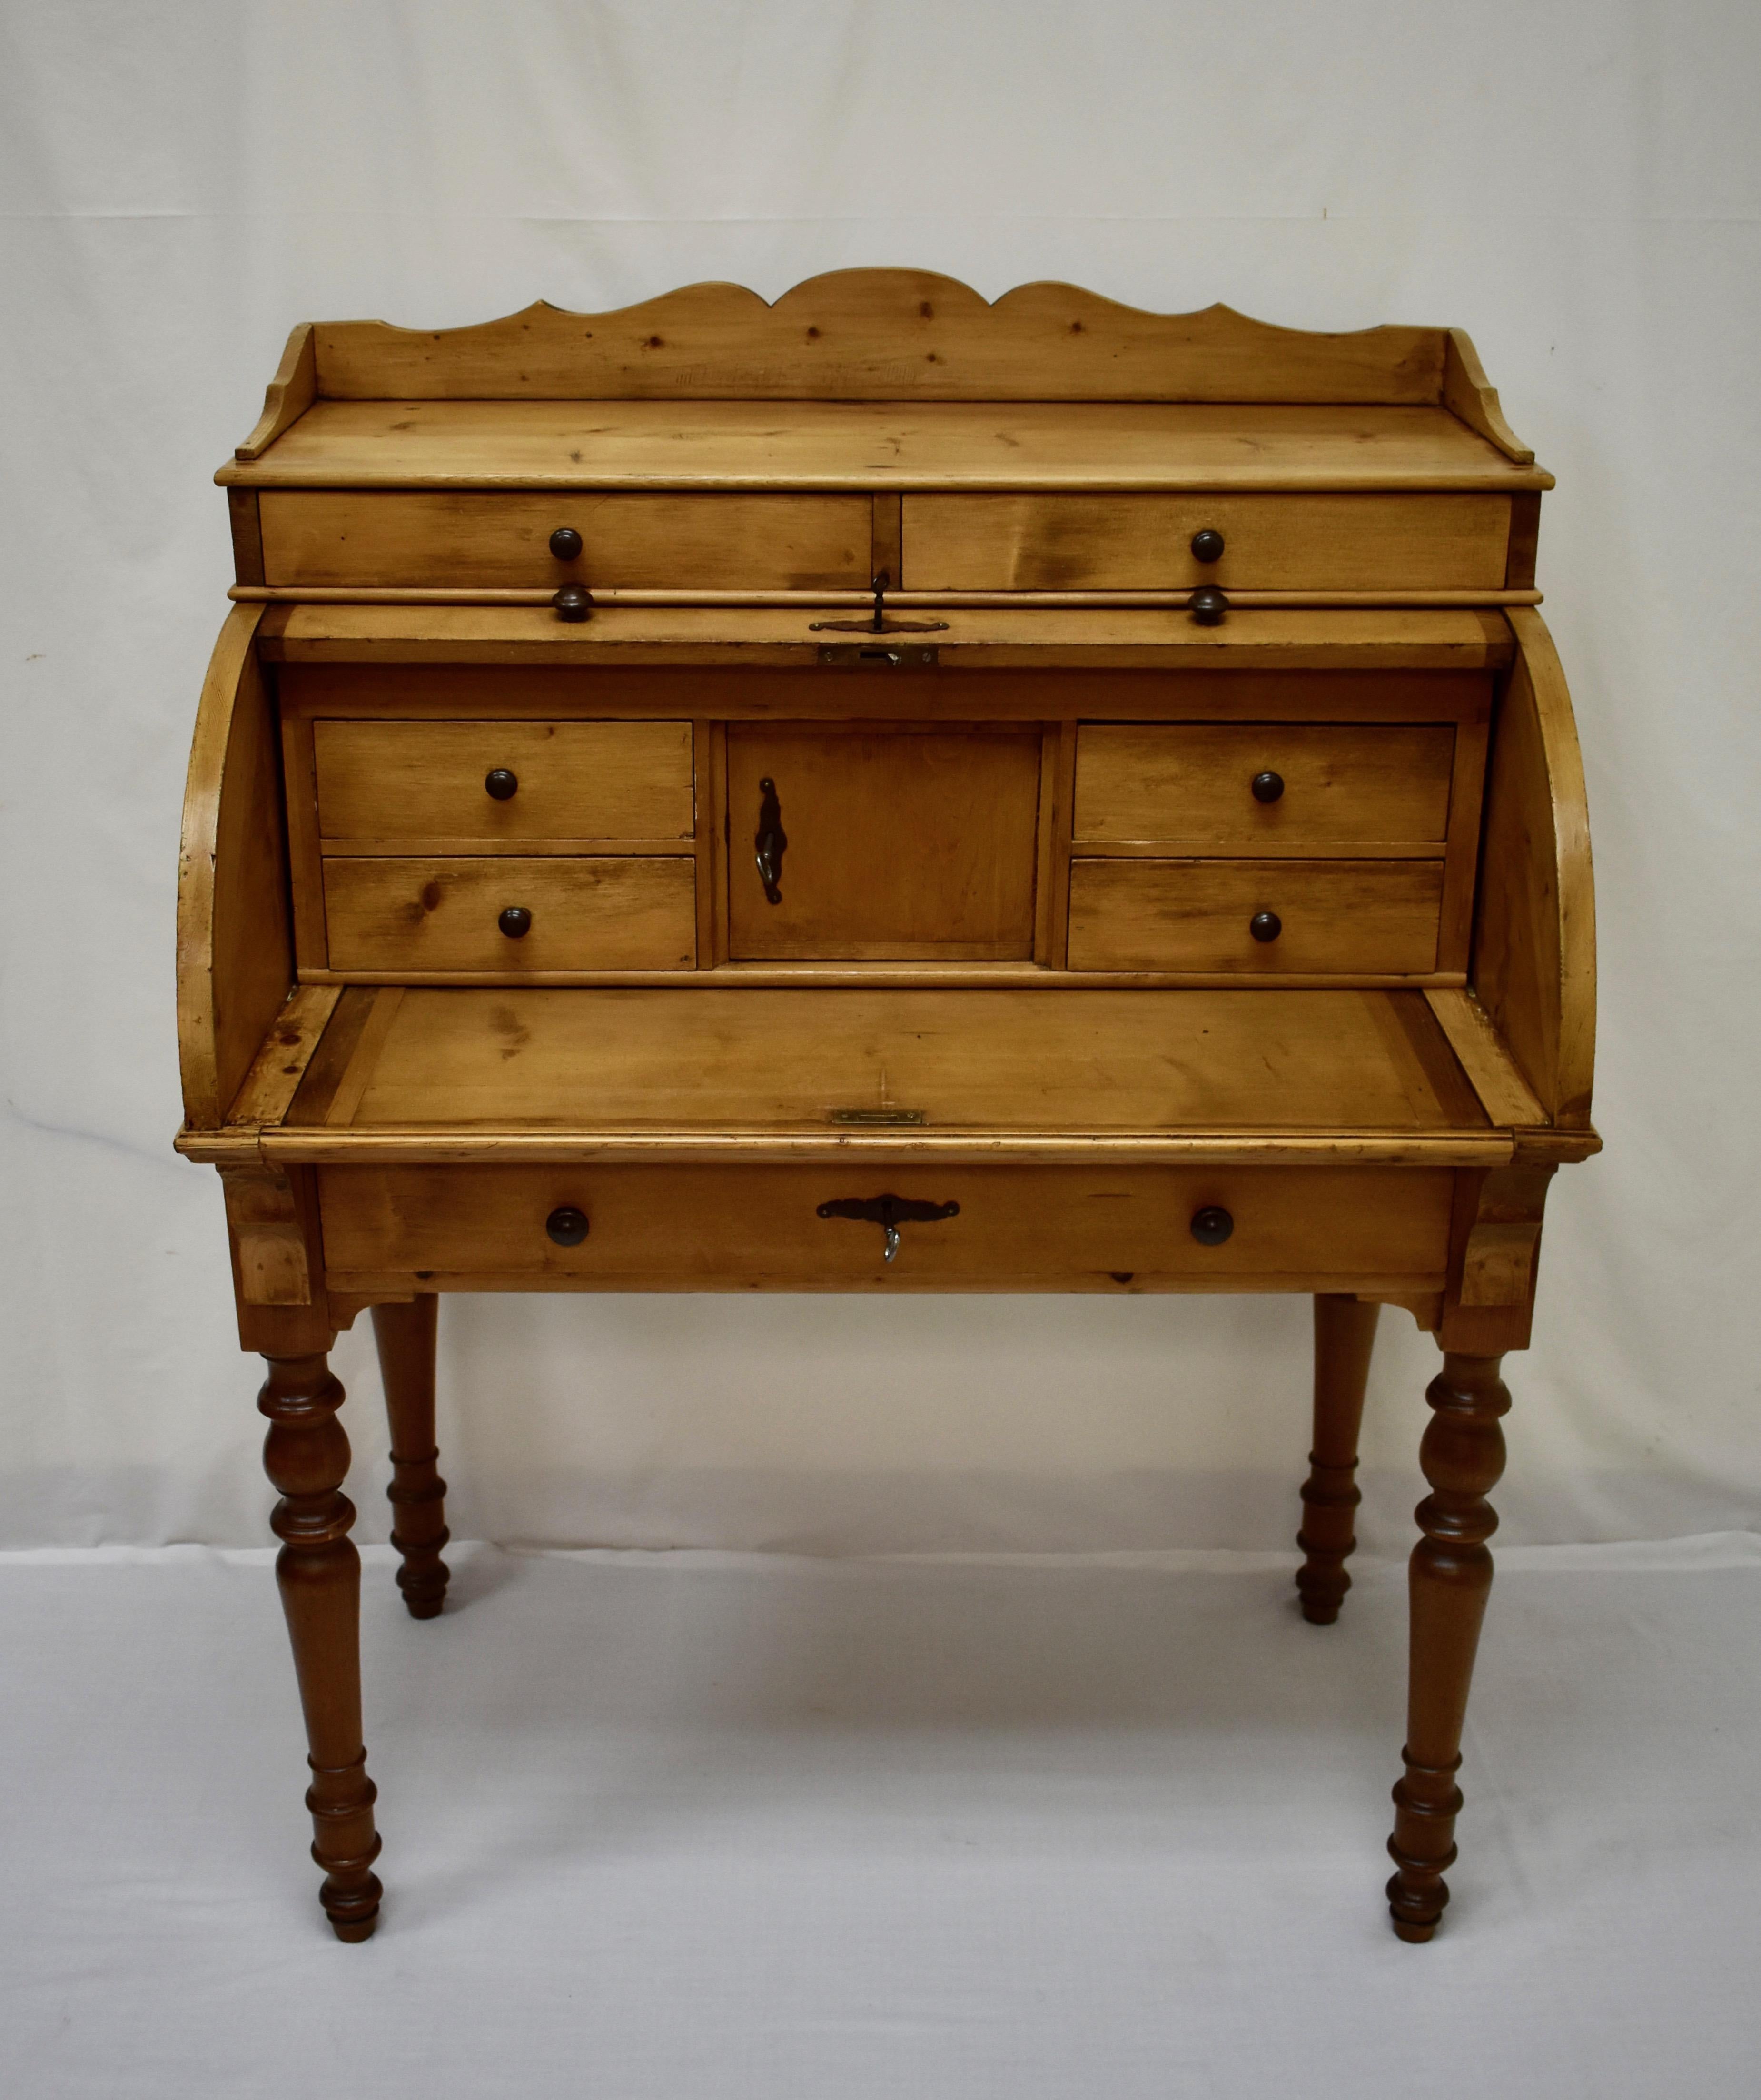 This splendid Swedish writing desk is one of the nicest antique pine cylinder rolls we have ever offered for sale. It has spent the last twenty years in this dealer’s personal collection.
A top shelf bordered by a scalloped gallery has two shallow